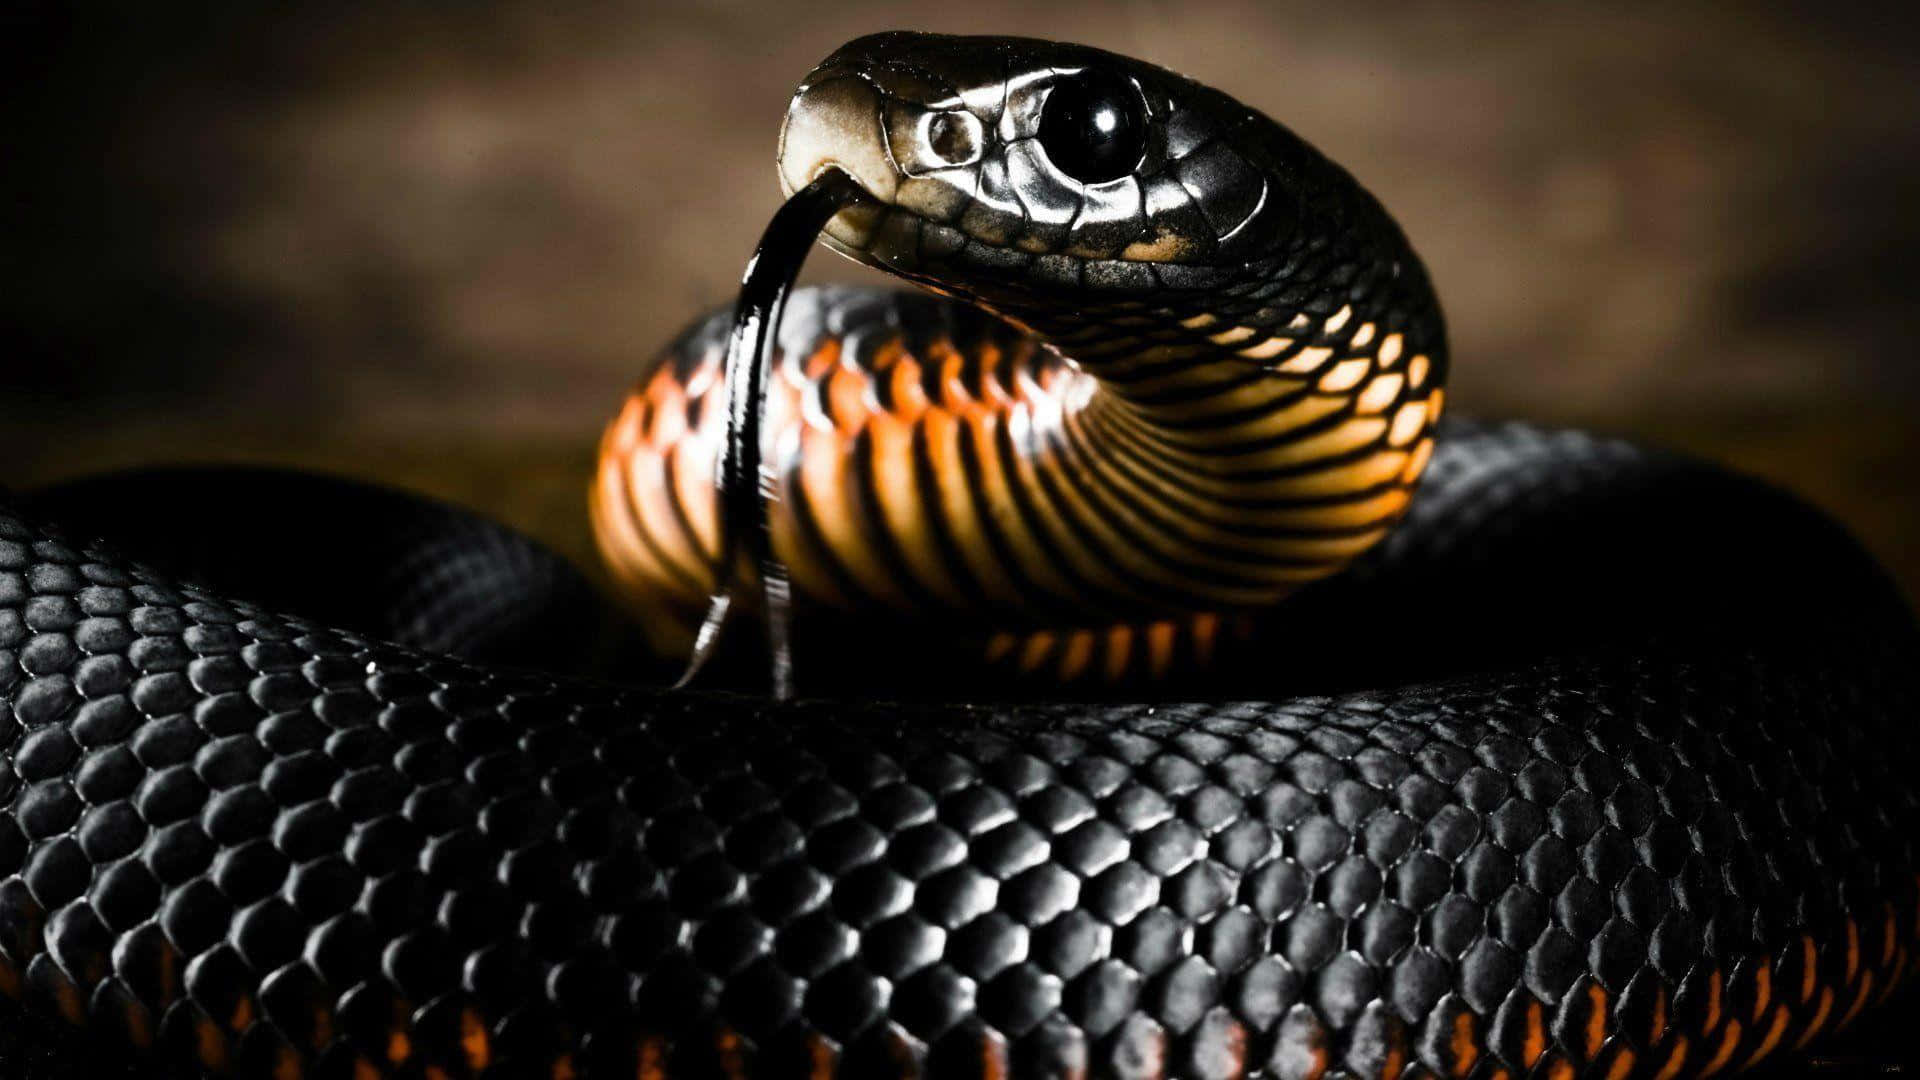 An Up Close View of a Majestic Cobra Snake